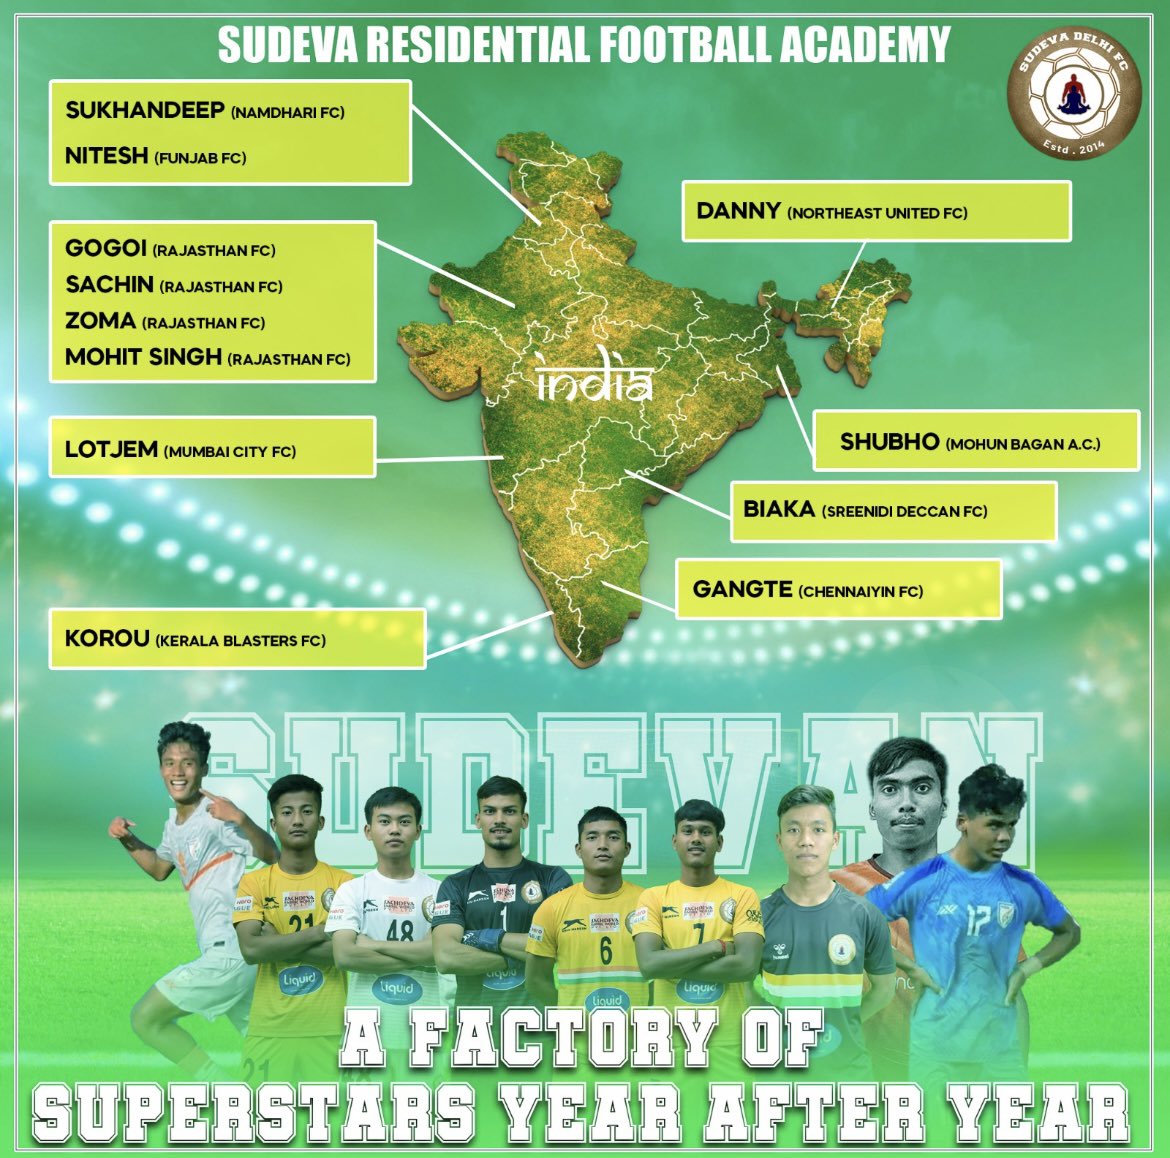 Majority of players from Sudeva are less then 19 and they have been signed with top ISL Clubs giving salary packages in 7 figures.